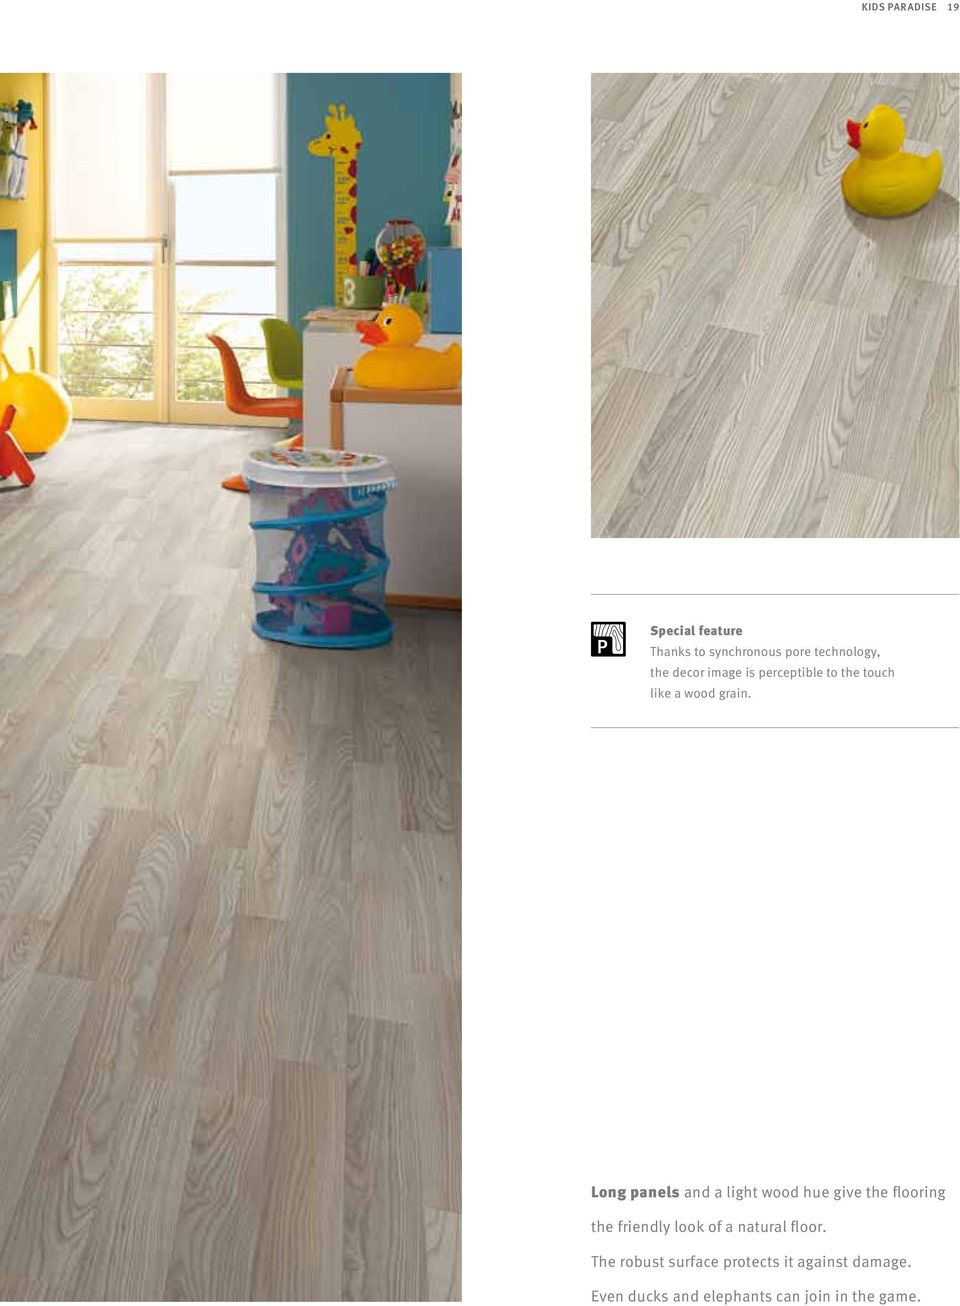 Long panels and a light wood hue give the flooring the friendly look of a